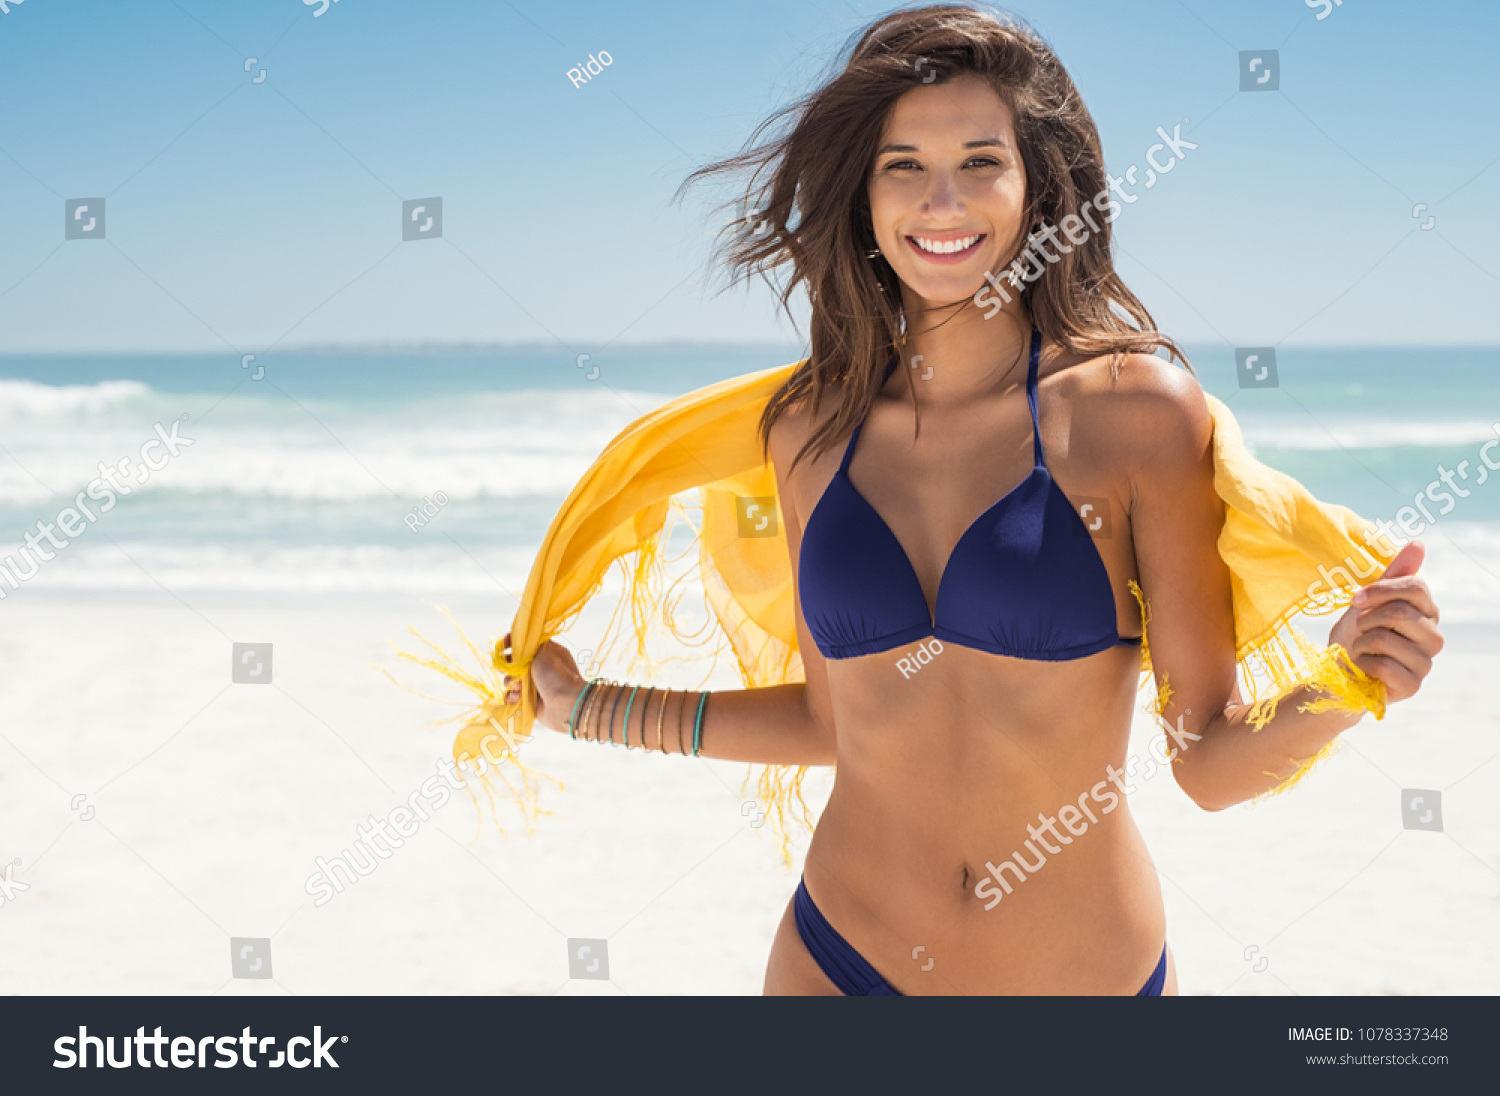 Happy woman smiling and having fun at beach. Summer portrait of young beautiful girl running on beach with a yellow scarf. Latin girl laughing and looking at camera with joy.  #1078337348